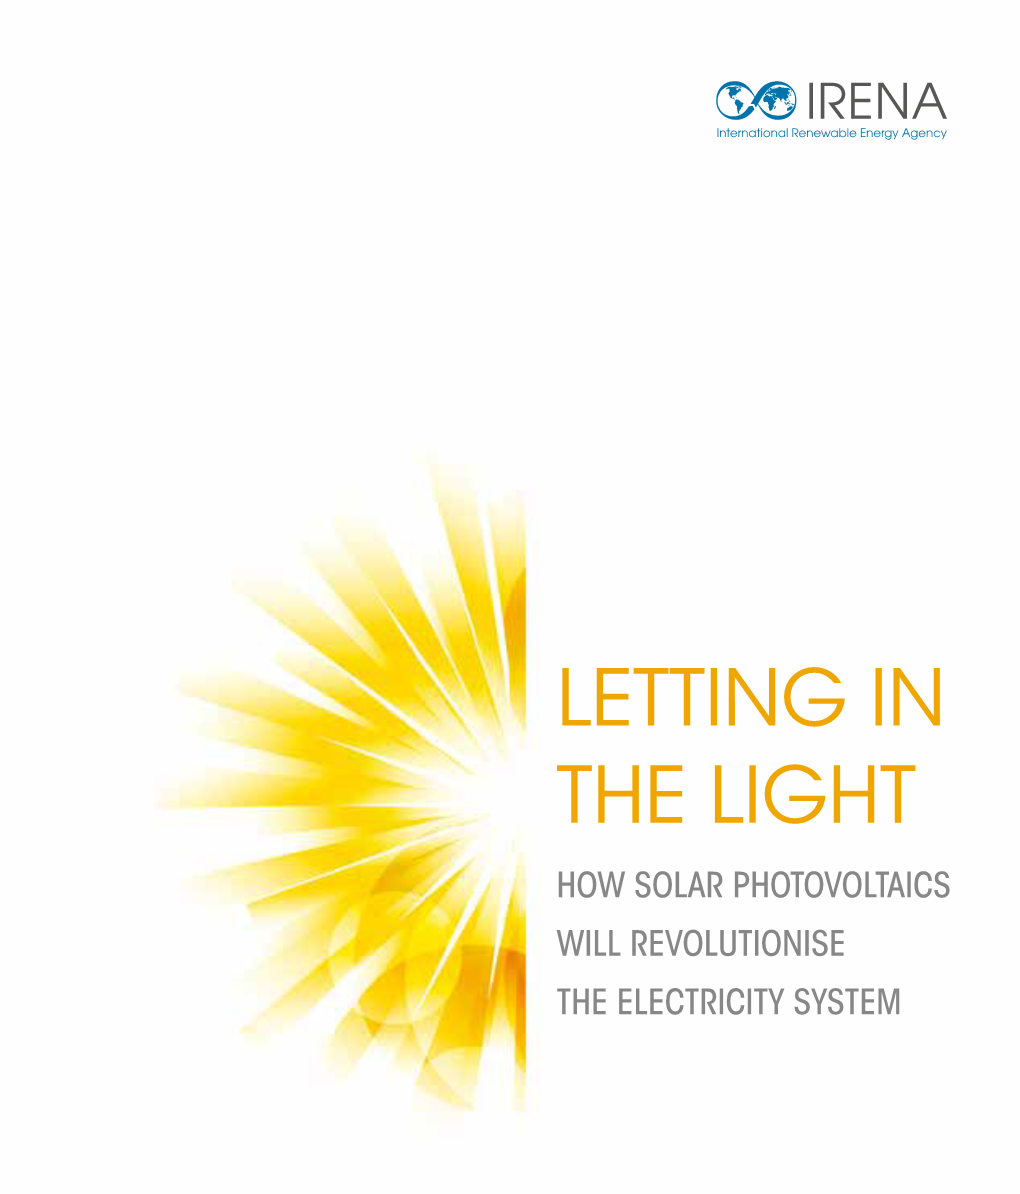 Letting in the Light: How Solar Photovoltaics Will Revolutionise The